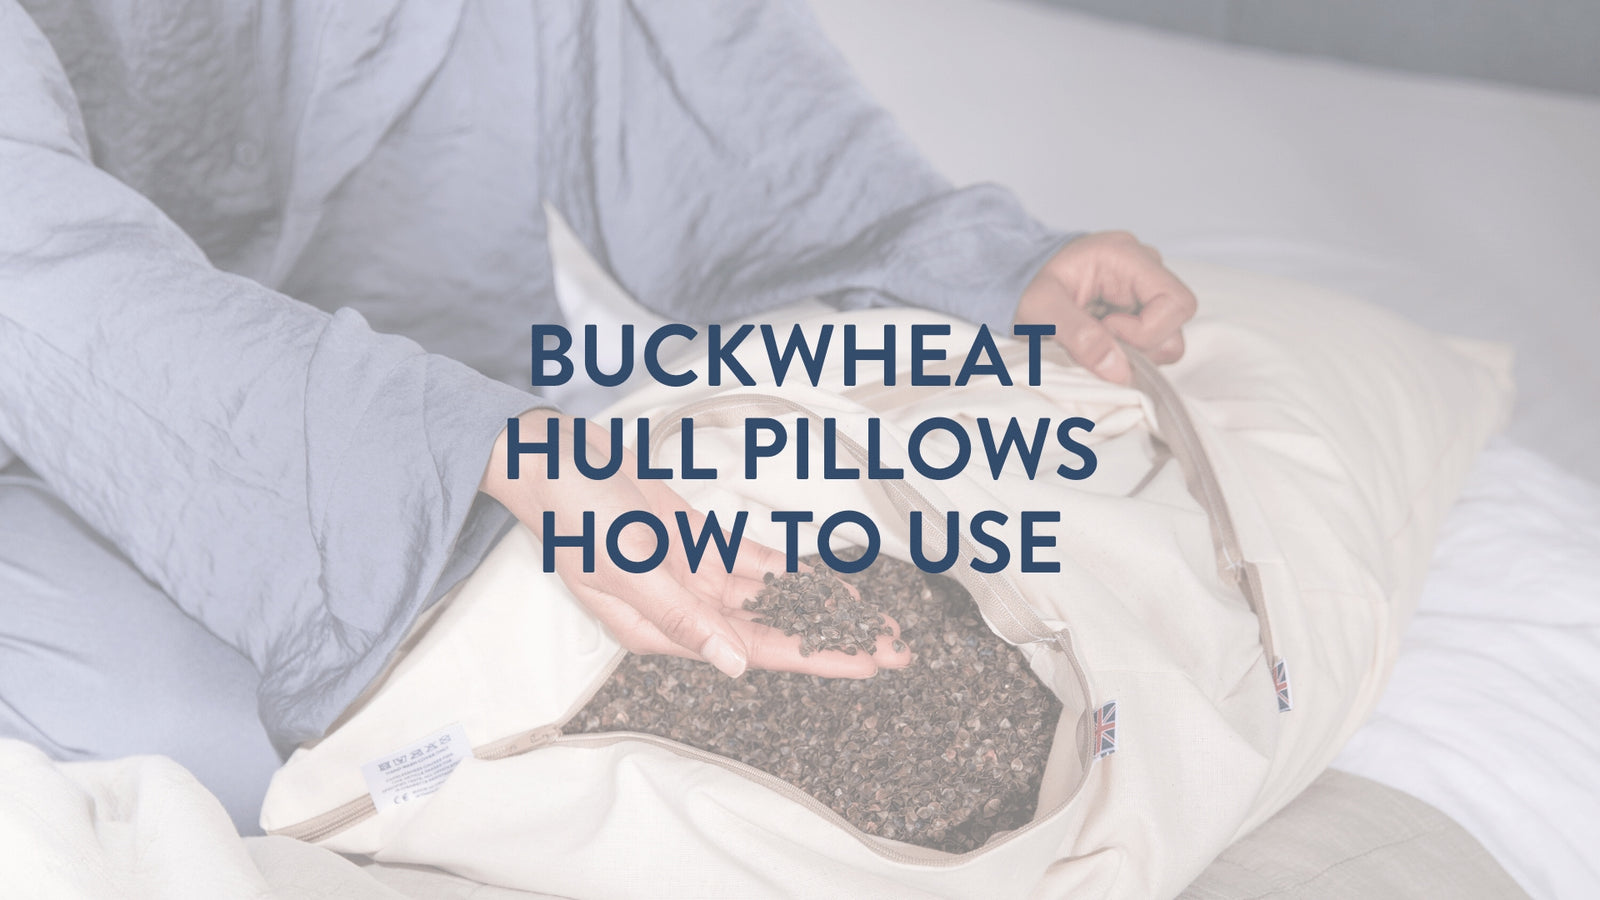 Buckwheat Hull Pillows - How To Use & Are They Comfortable? Putnams UK